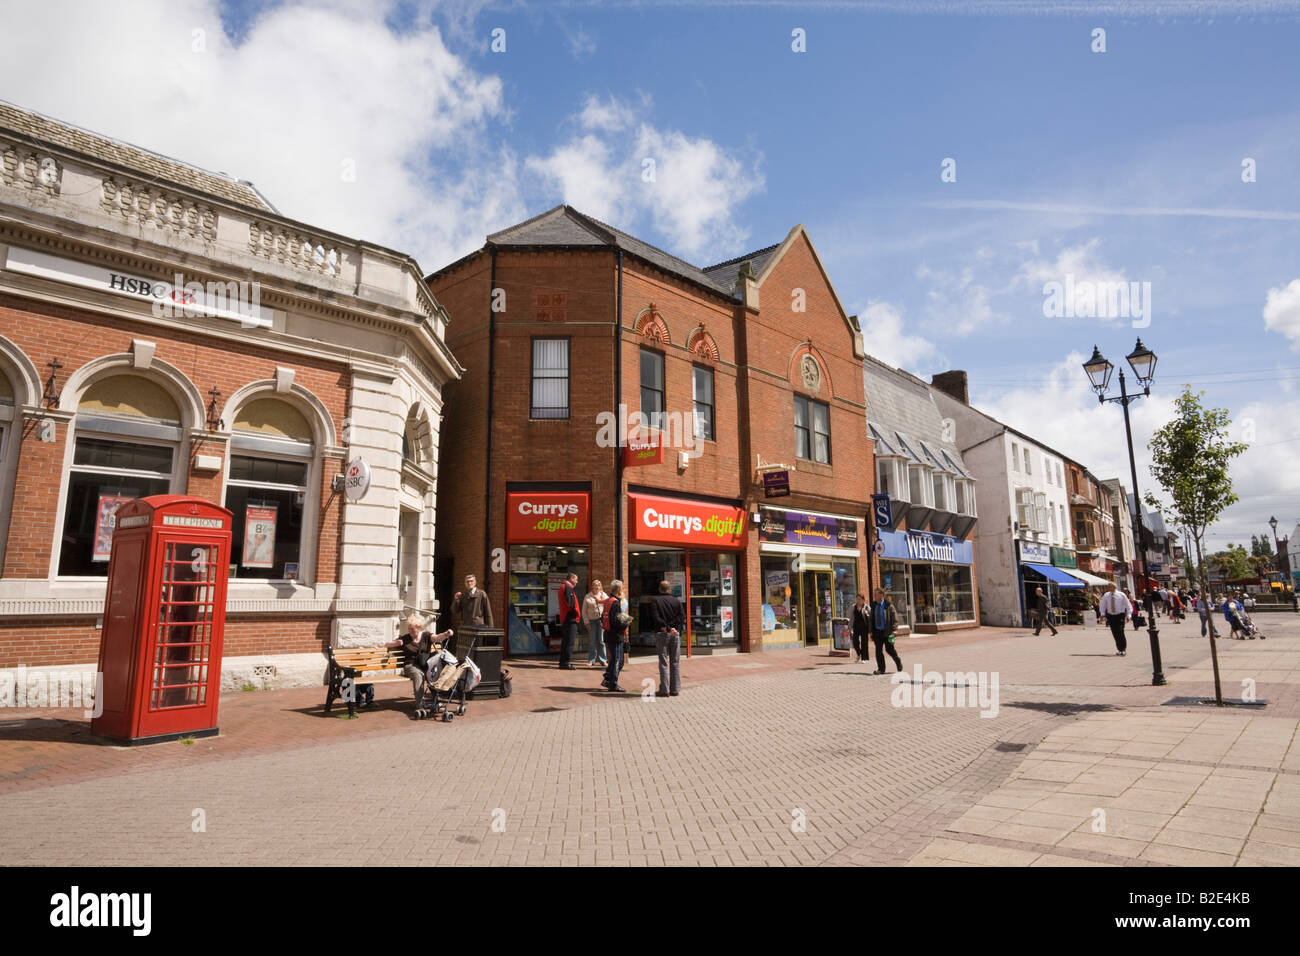 Ormskirk Lancashire England UK July People and shops in pedestrianised town centre Stock Photo